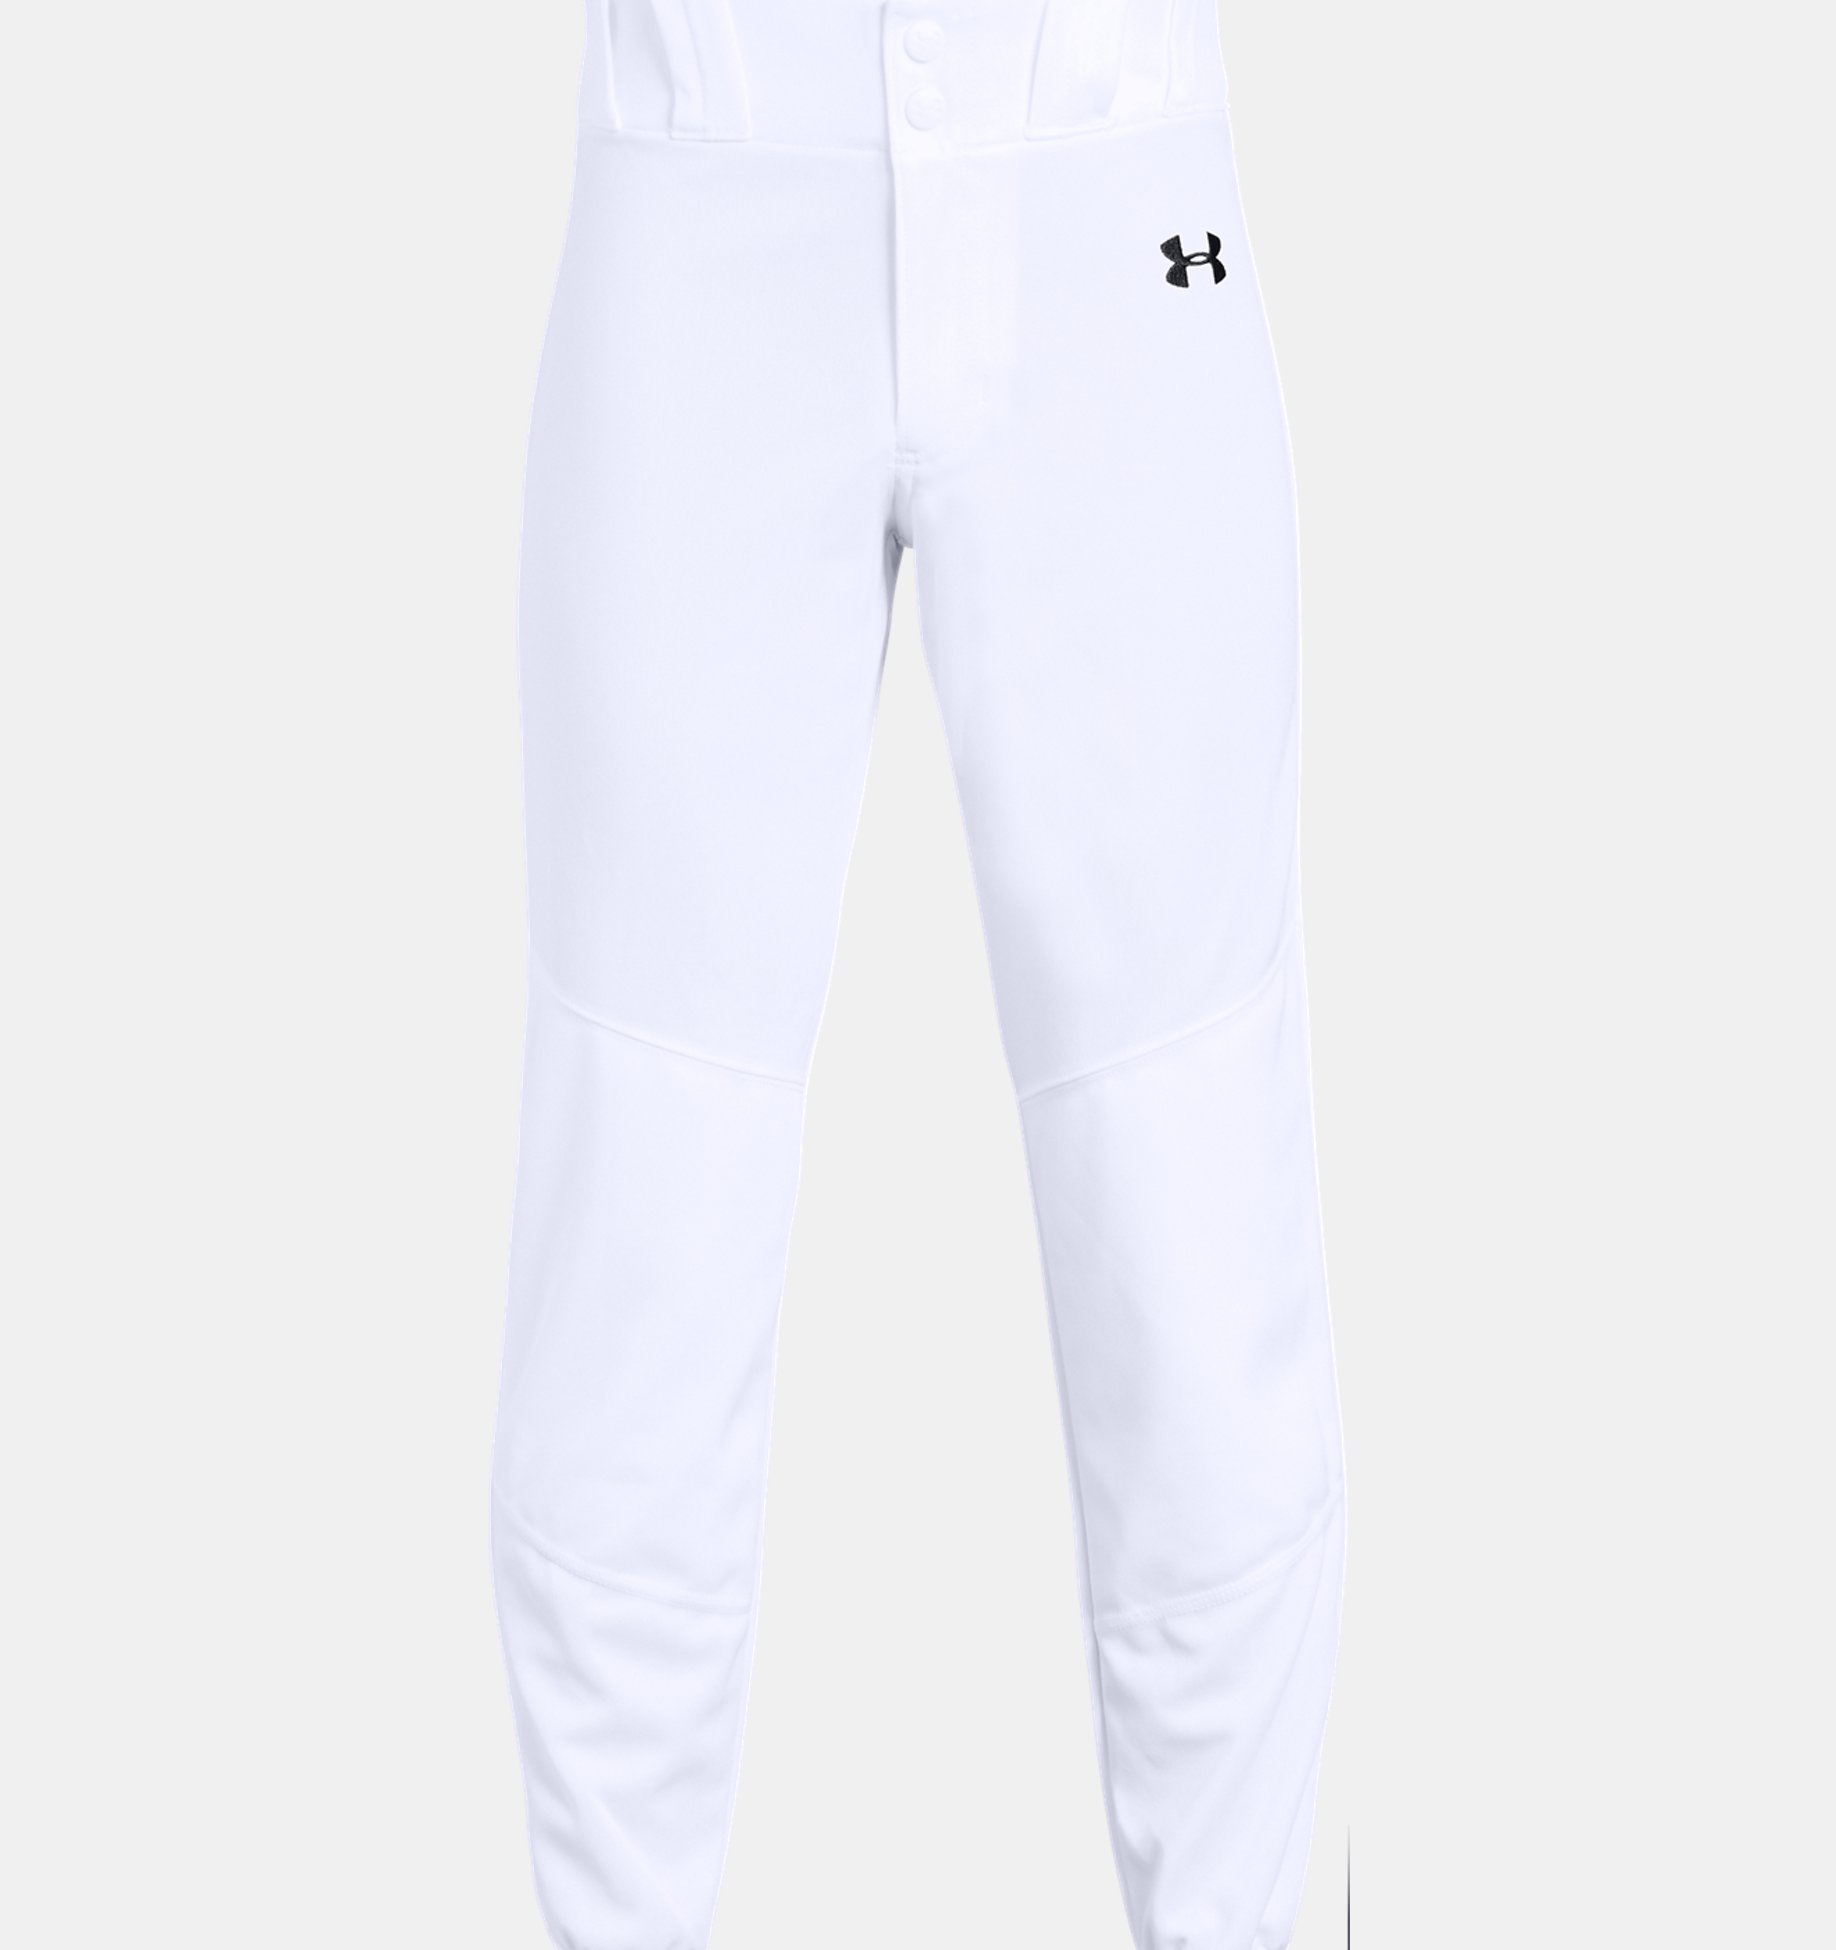 Details about   NEW Under Armour Boys' UA Lead Off Baseball Pants 1281190 YOUTH SMALL YSM GREY 